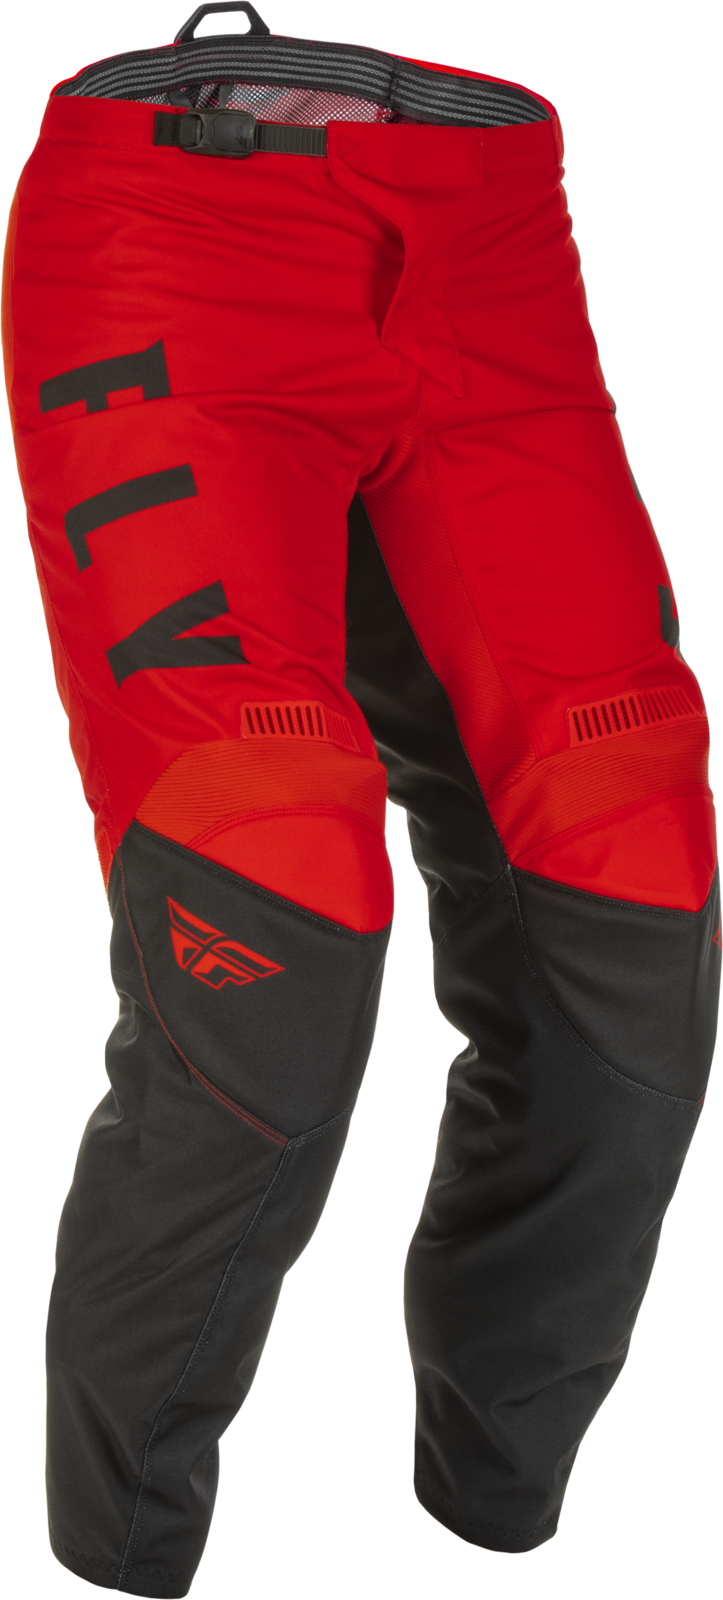 FLY 2022 F-16 Red/Black Pants - FLY Racing